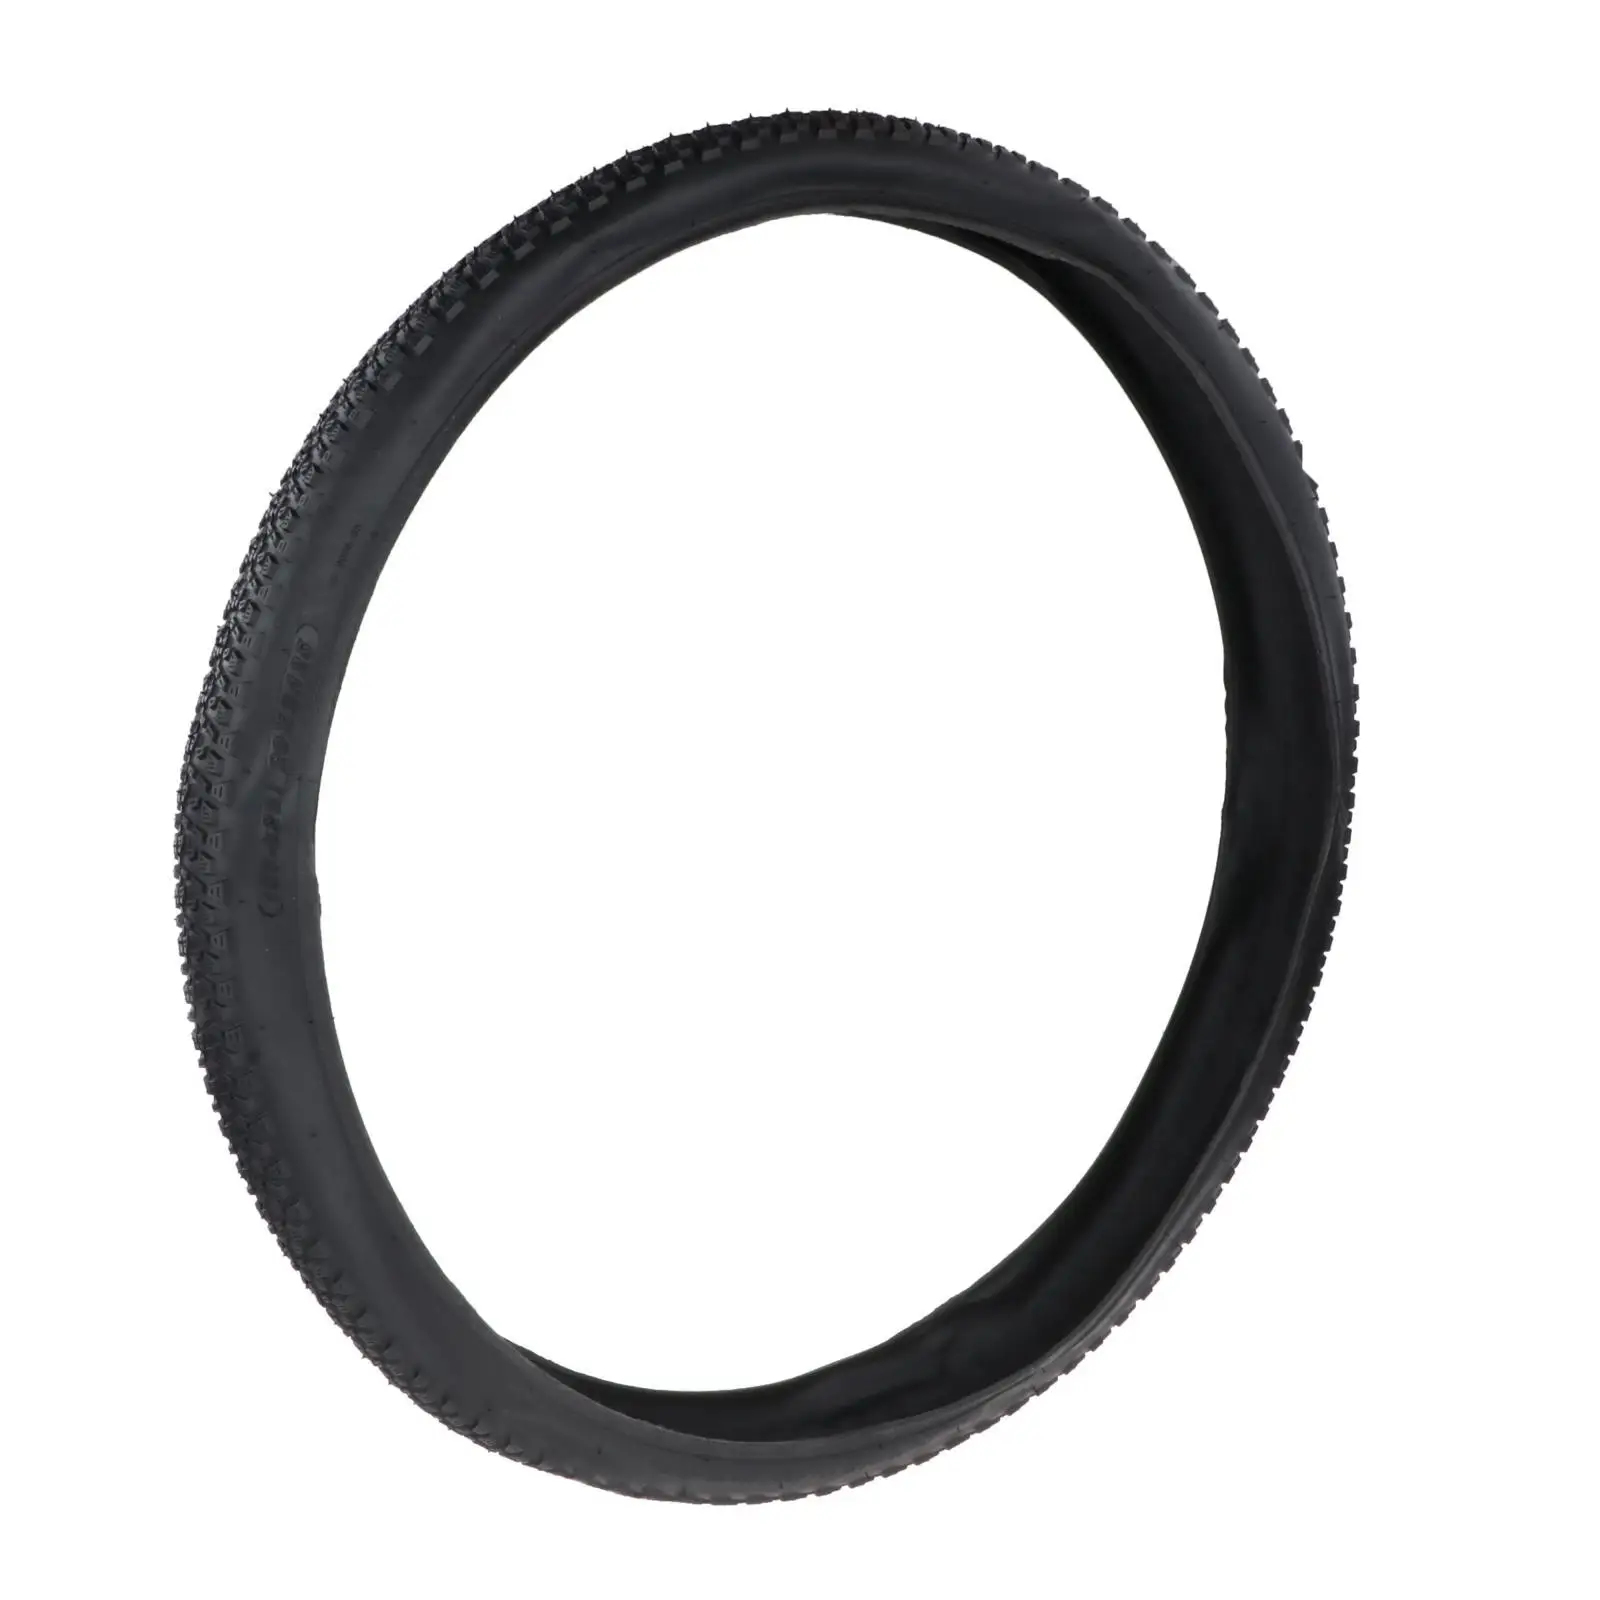 Mountain Bike Tire Wear Resisting ADAPT Various Road Conditions Balance Portable Lasting Bicycle Outer Tyre for Bike Tour